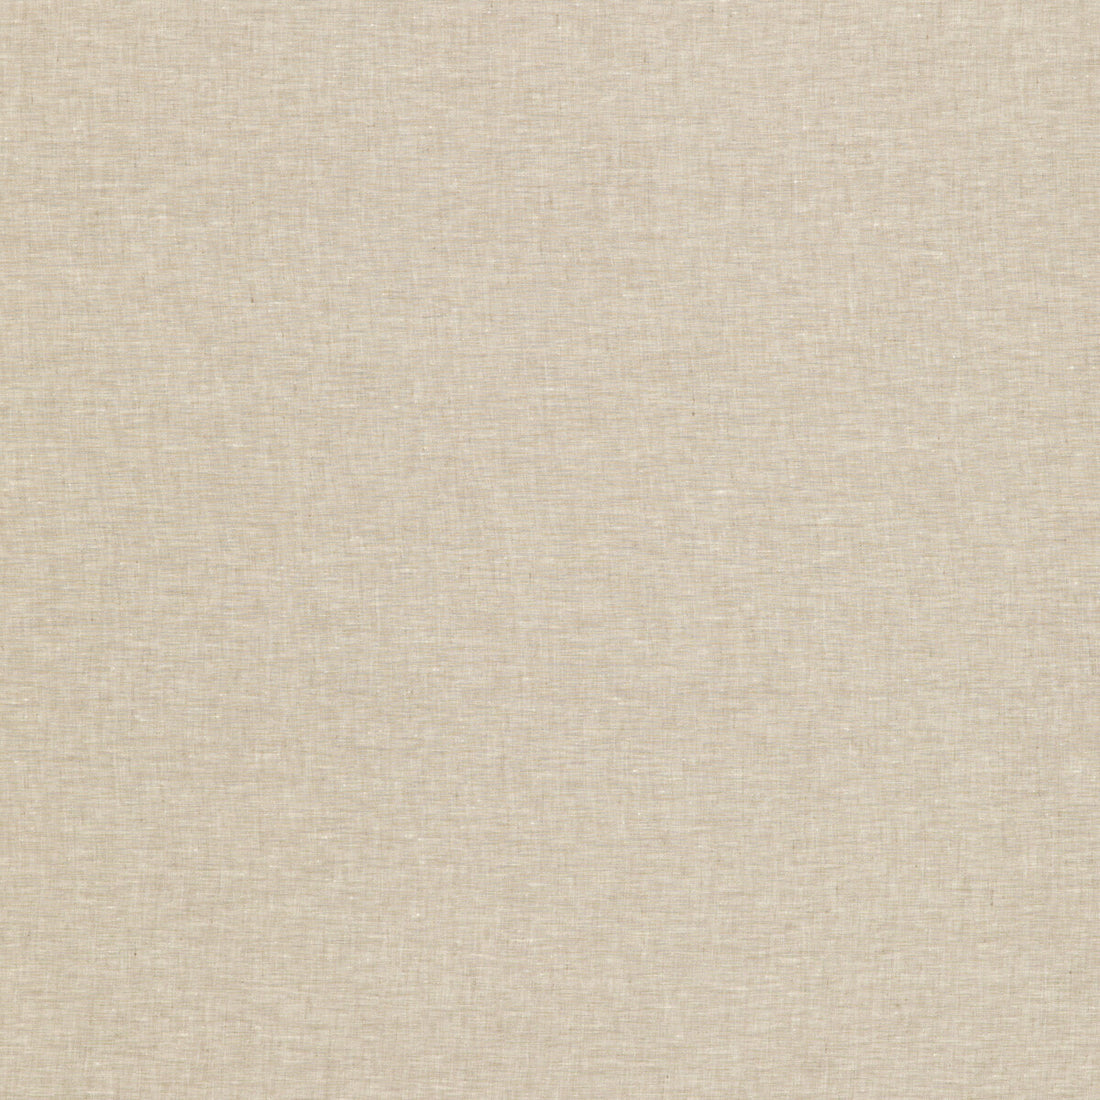 Nala Linen fabric in dove color - pattern ED85329.910.0 - by Threads in the Nala Linens collection